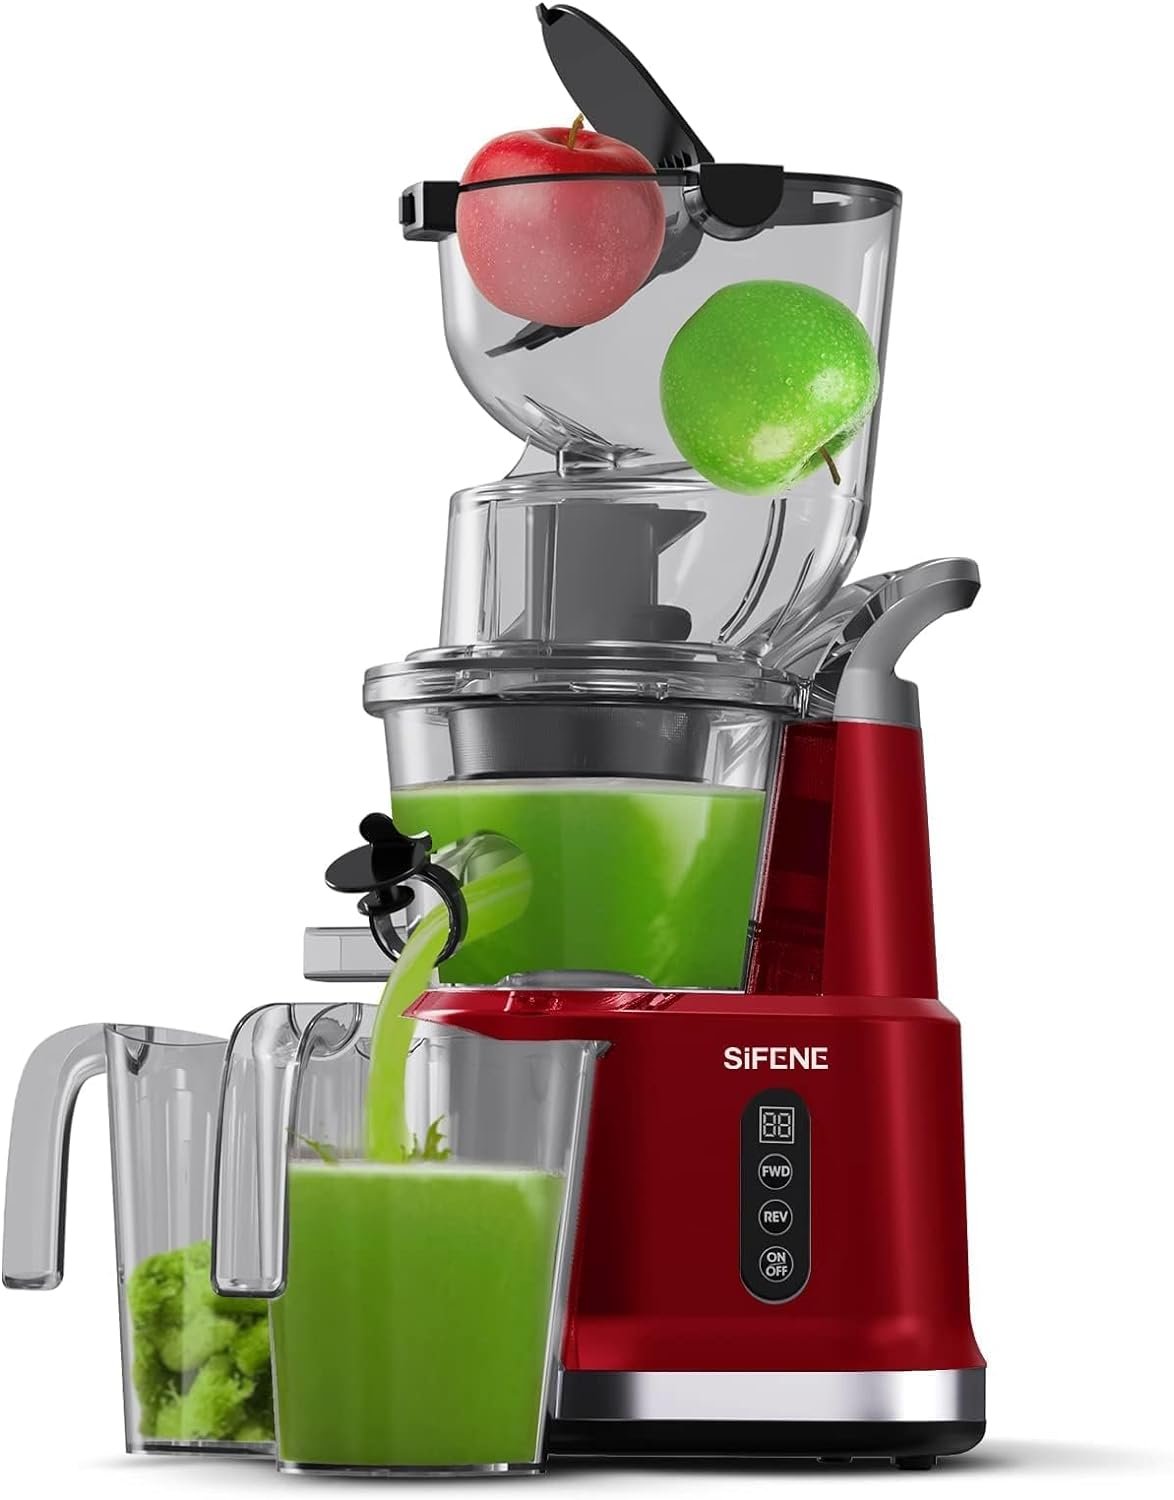 SIFENE Whole Juicer Machine, Vertical Cold Press Juicer with 3.2 Big Mouth, Easy to Clean, Extracts Juice from Whole Fruits and Vegetables - Red